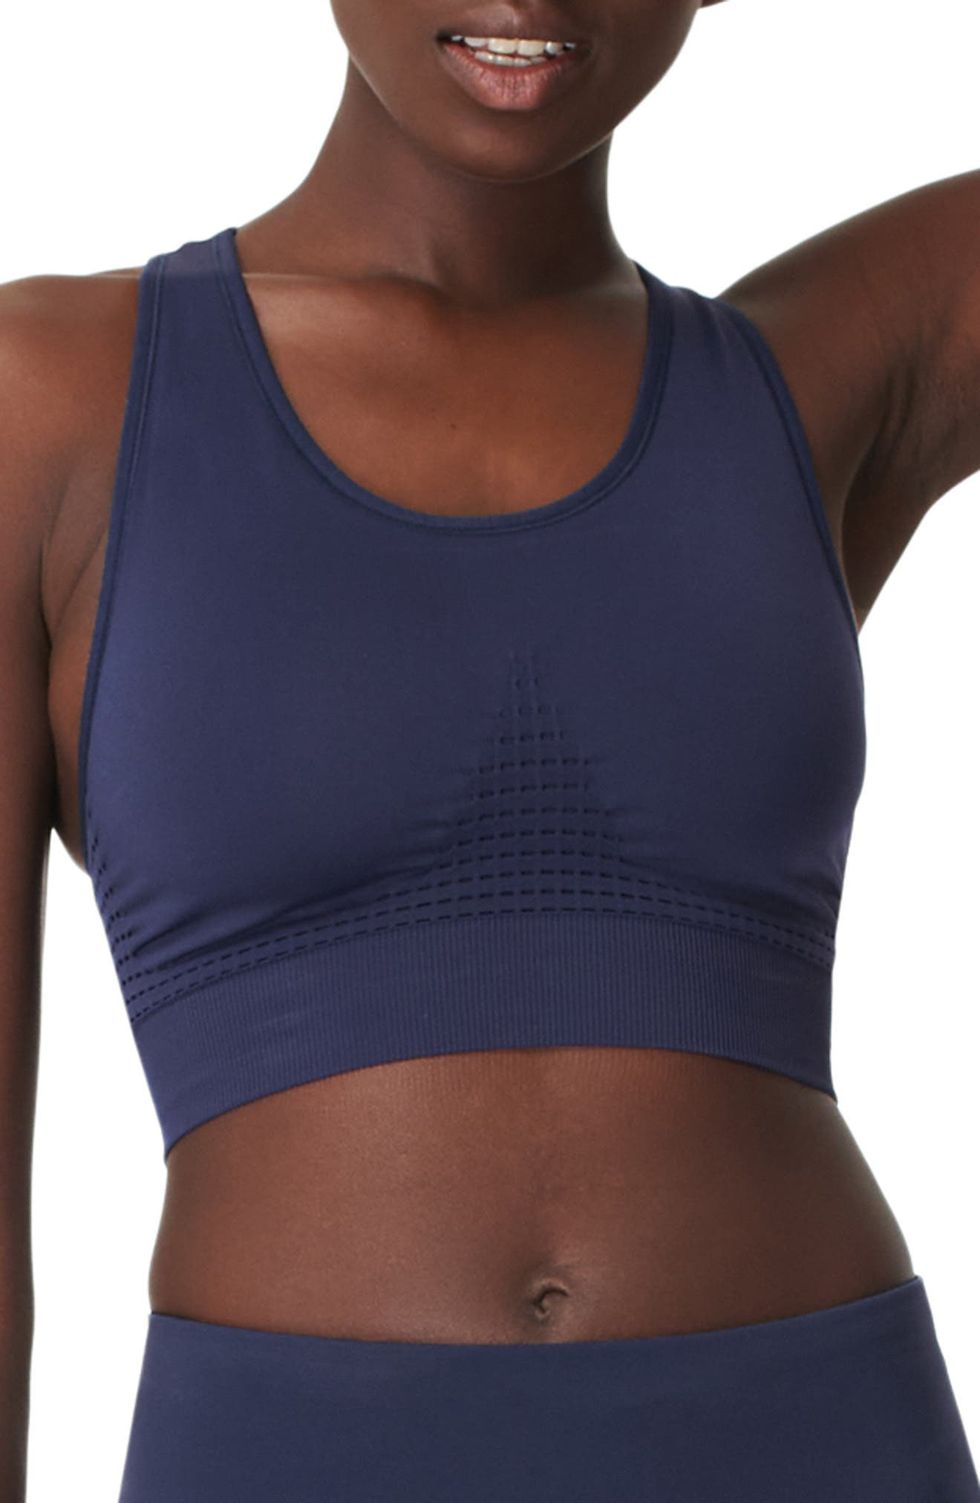 Nordstrom Sports Bra Sale: Deals Up To 50% Off Nike And Adidas